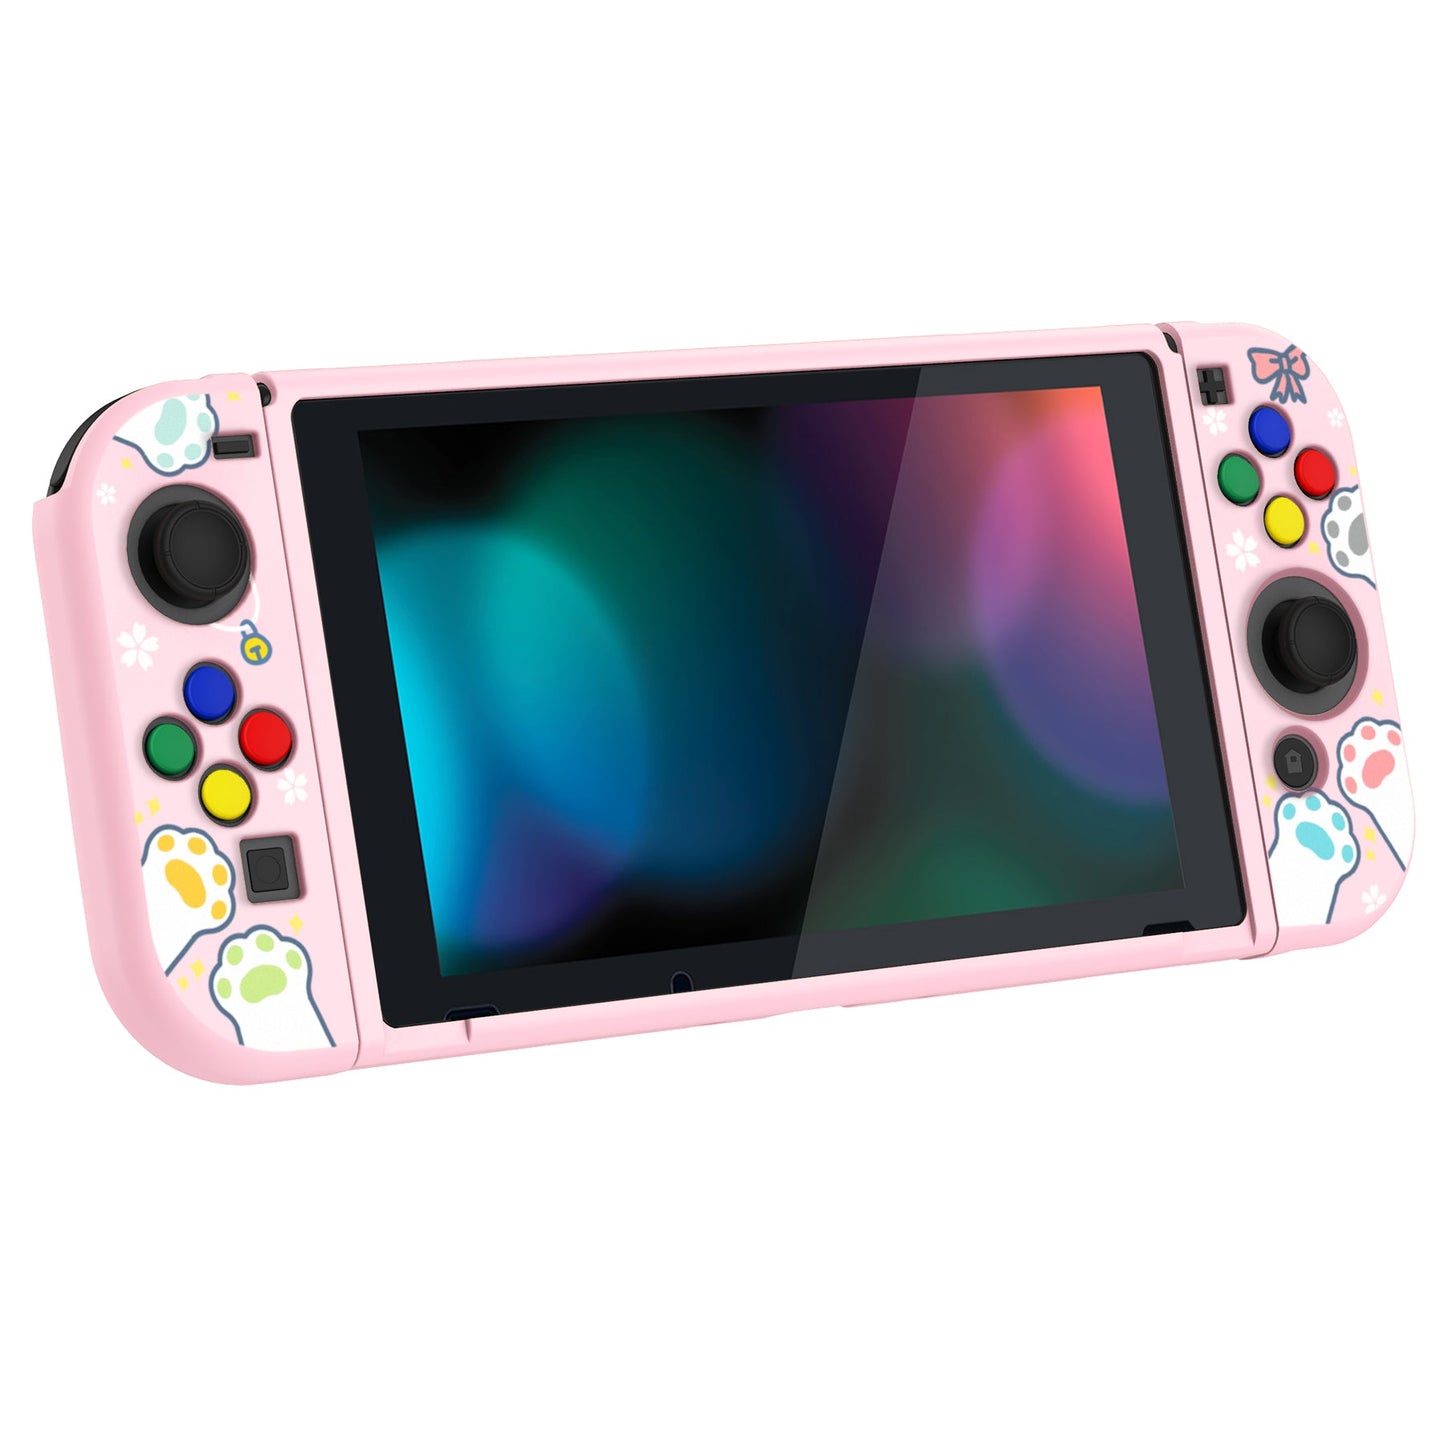 PlayVital Hungry Kitties Protective Case for NS, Soft TPU Slim Case Cover for NS Joycon Console with Colorful ABXY Direction Button Caps - NTU6020 PlayVital